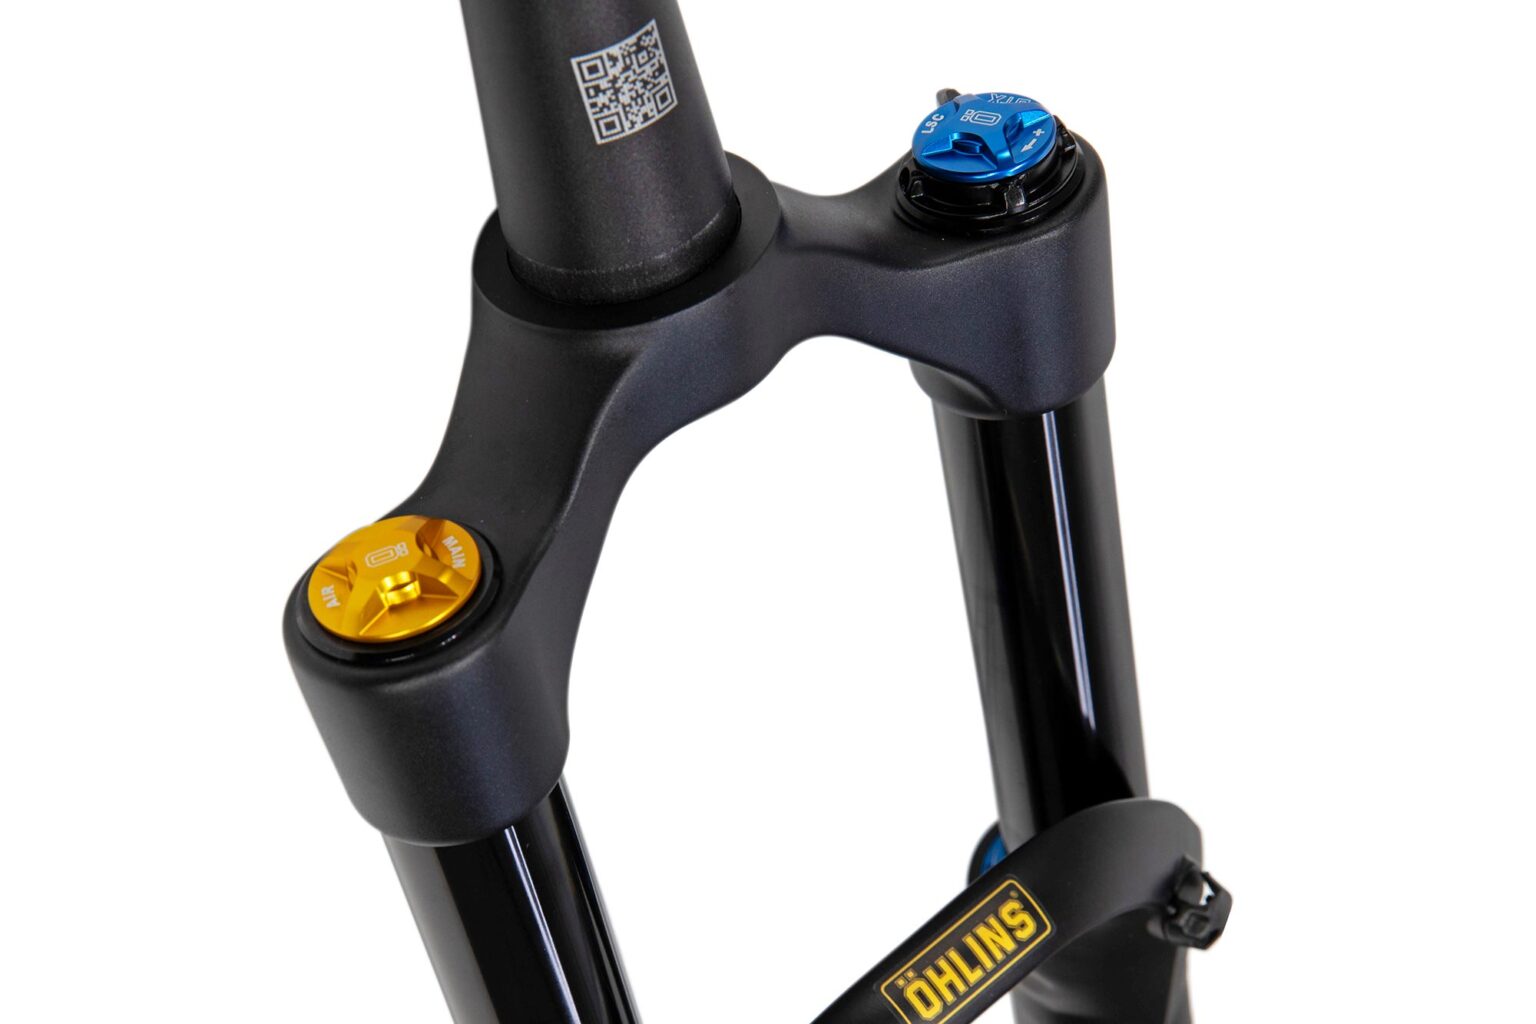 Öhlins RXF34 m.2 140mm travel trail mountain bike fork gets new crown with its longer travel